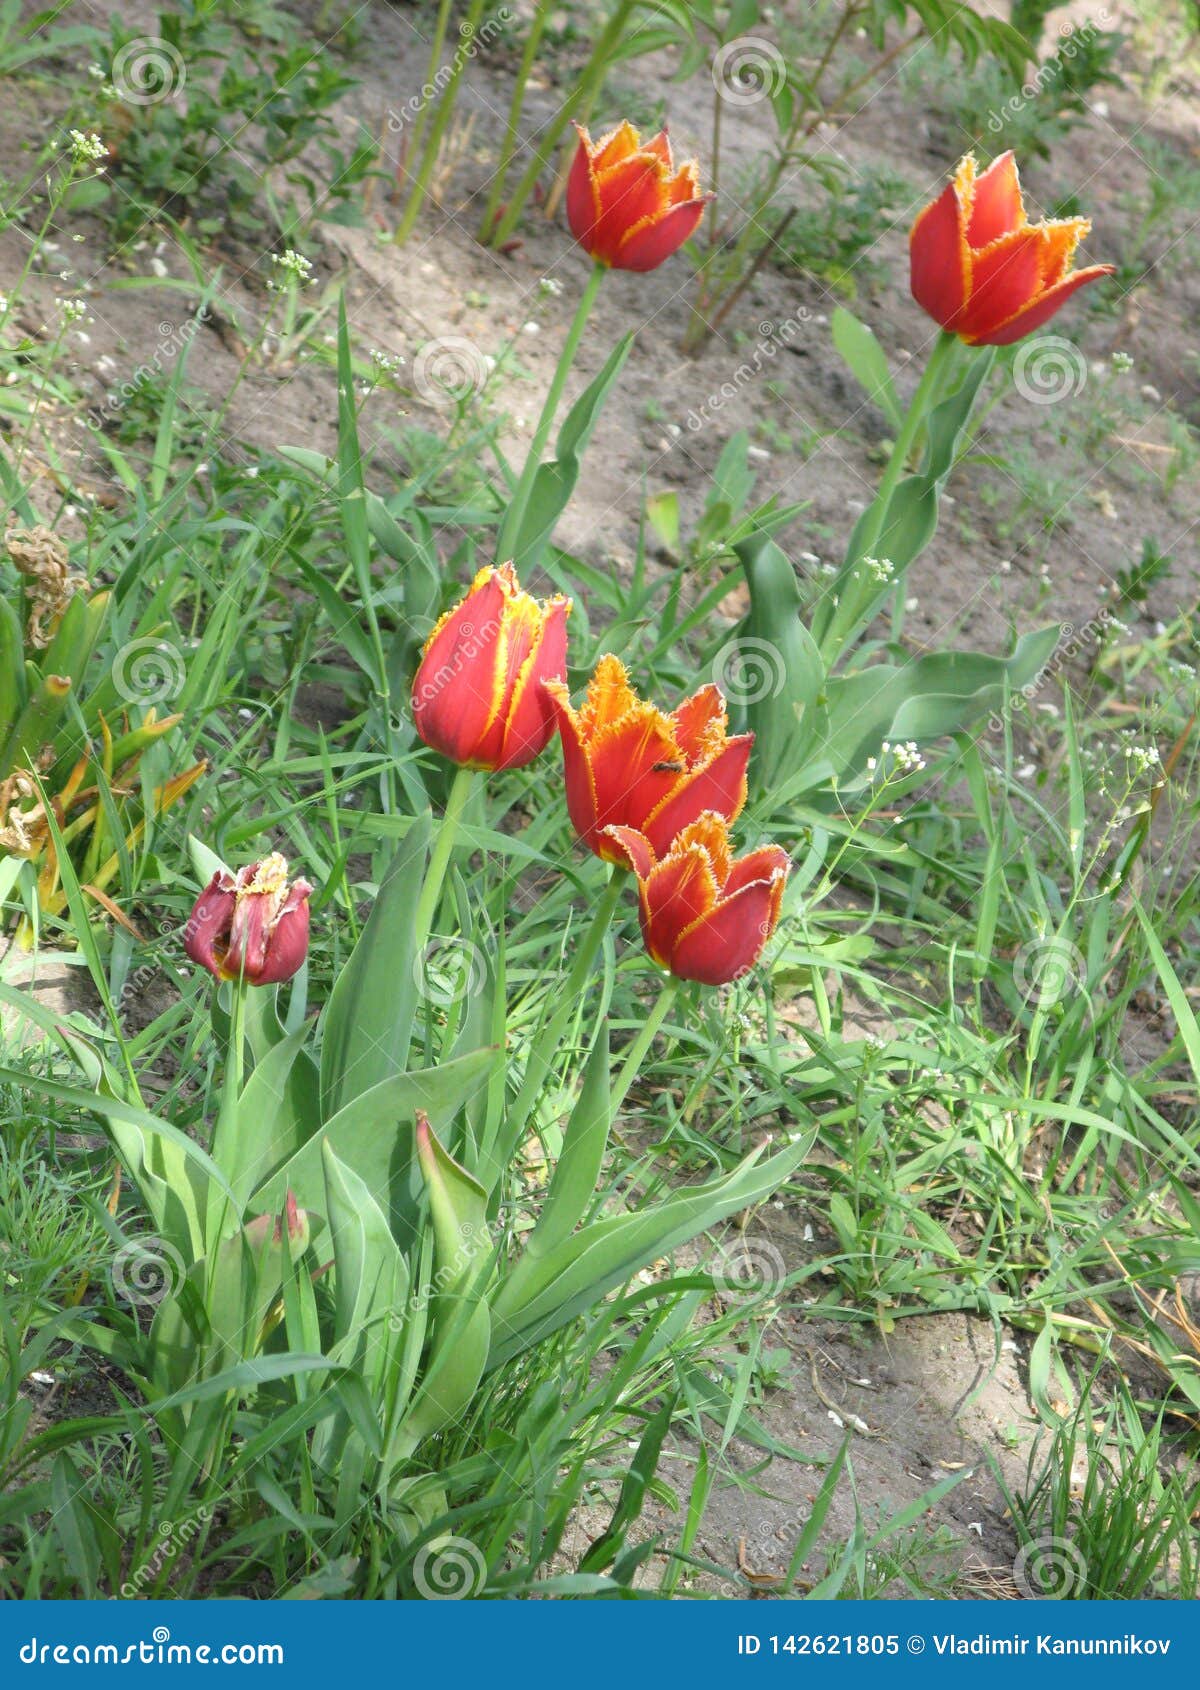 Small Red-yellow Fringed Tulip Flowers Stock Image - Image ...